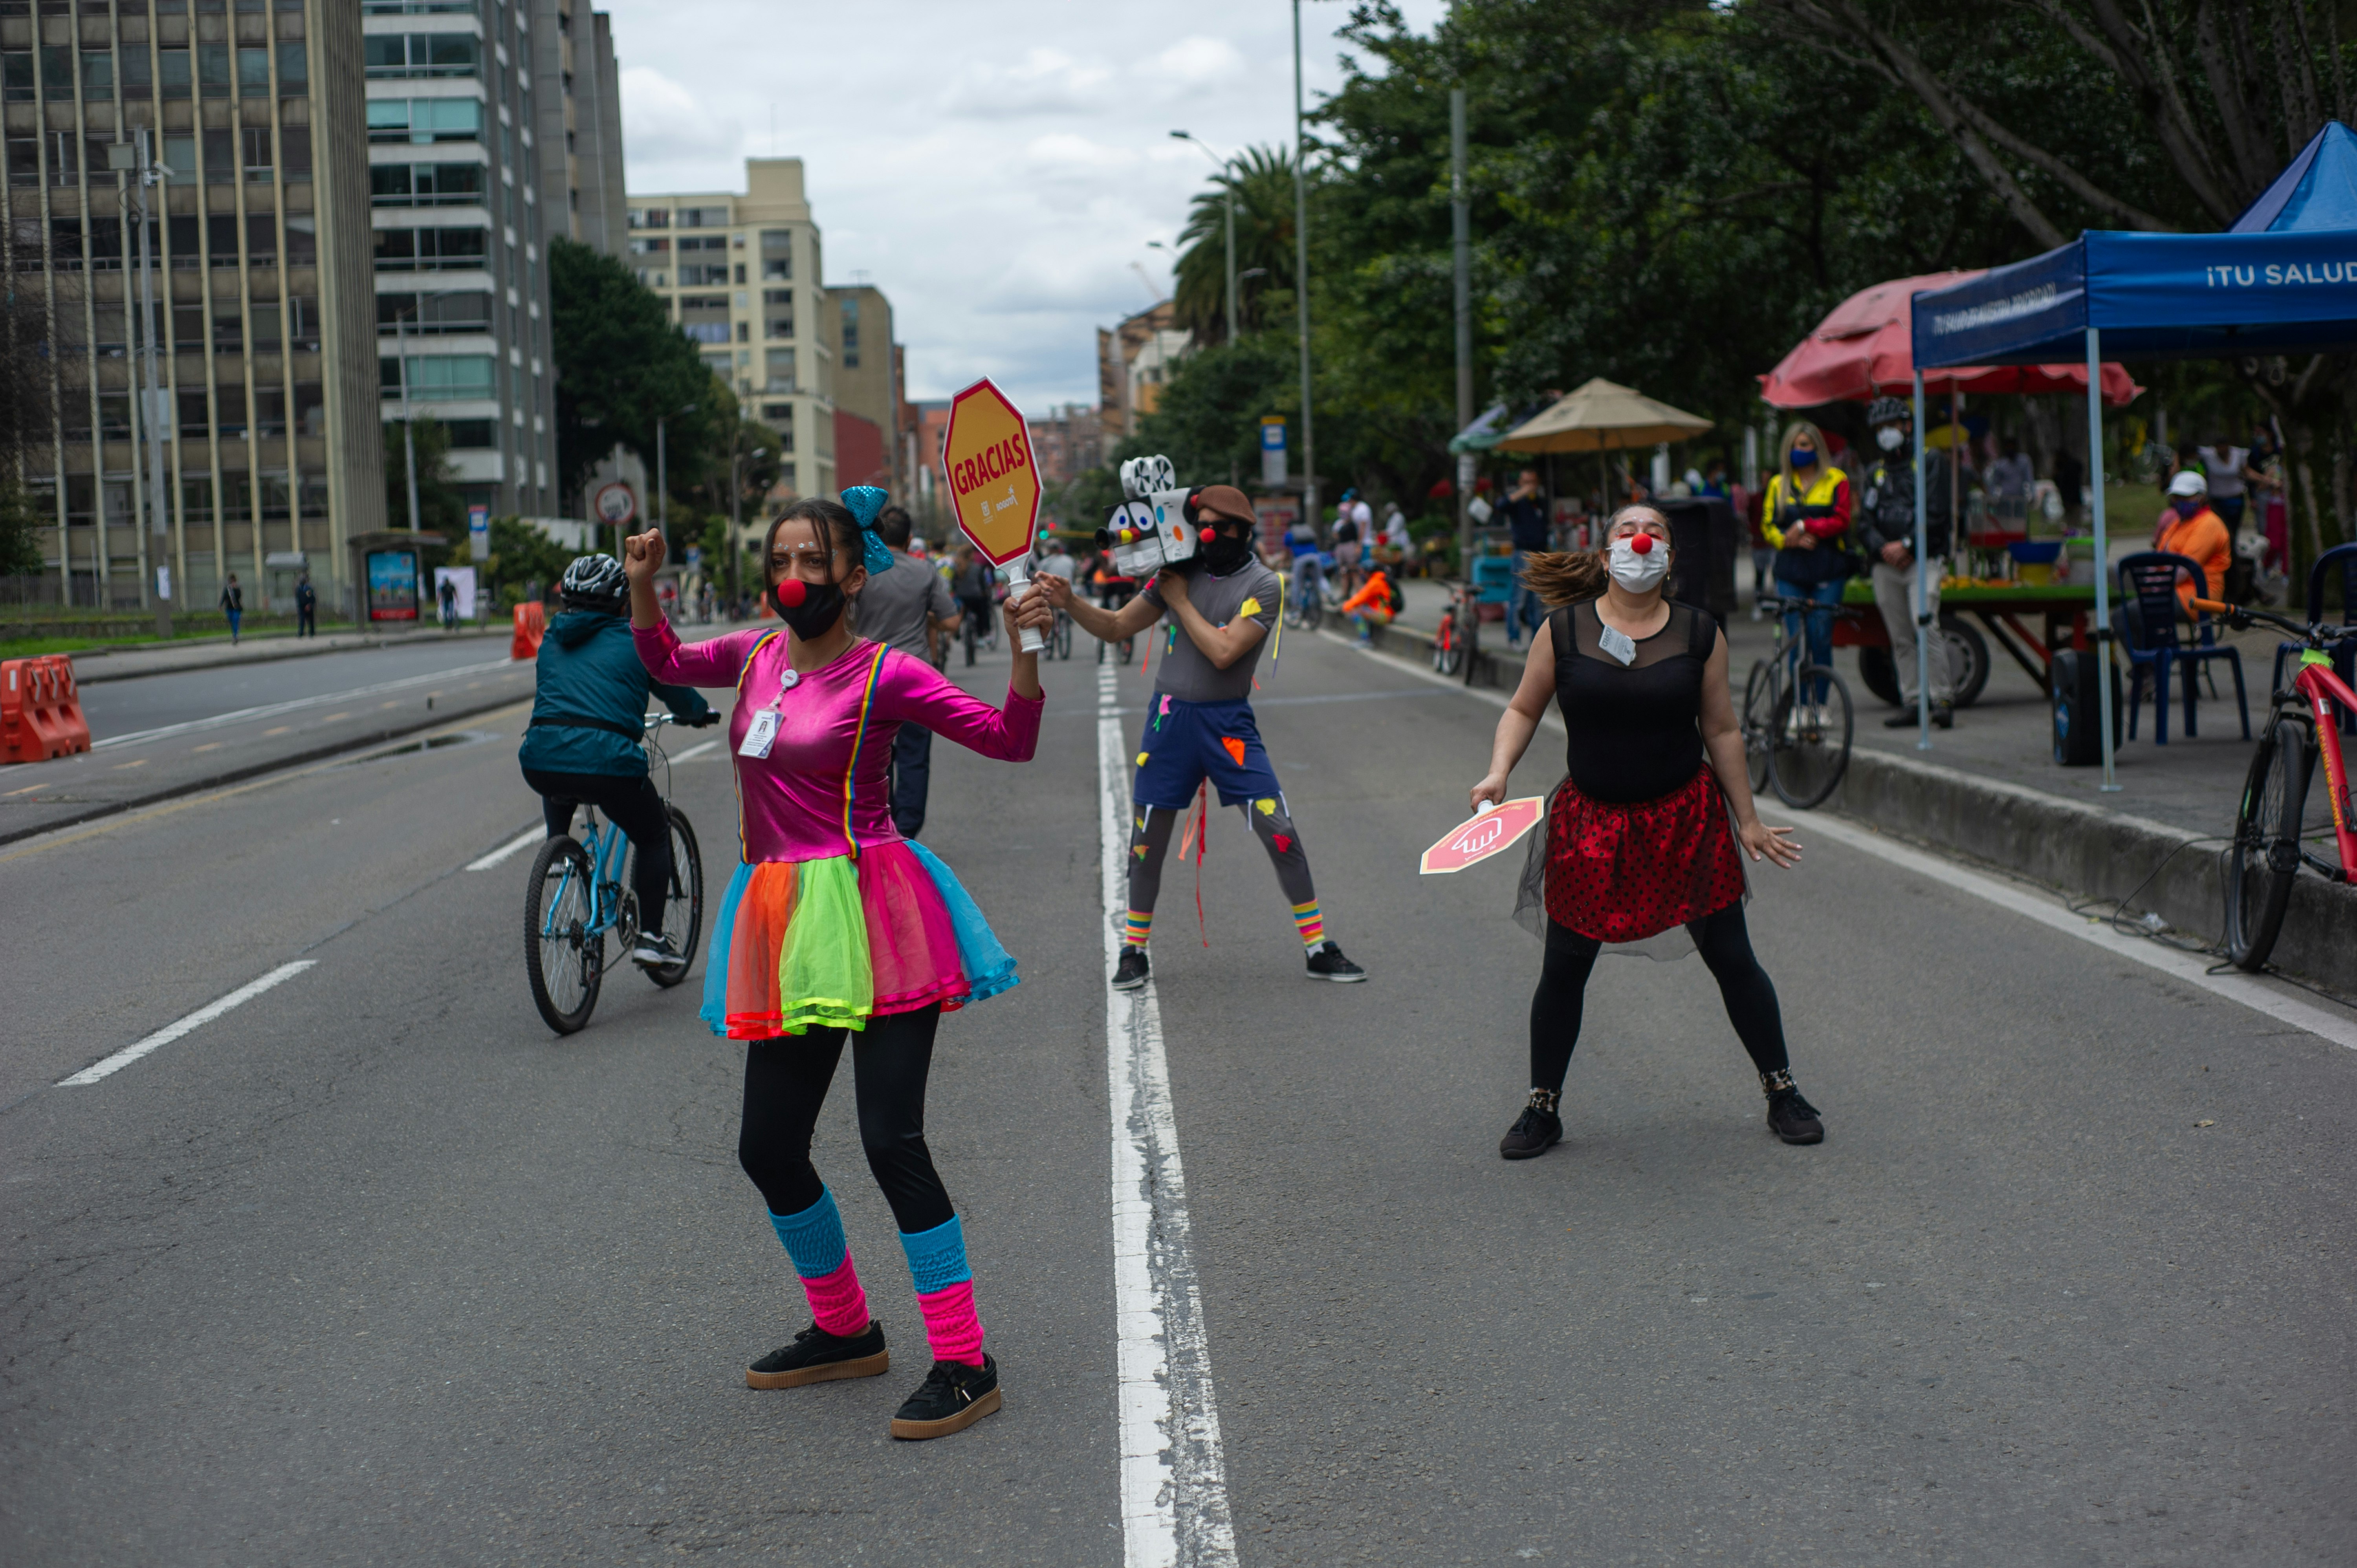 A group of performers dressed as clowns remember people to mantain social distancing and wear face masks in Bogota